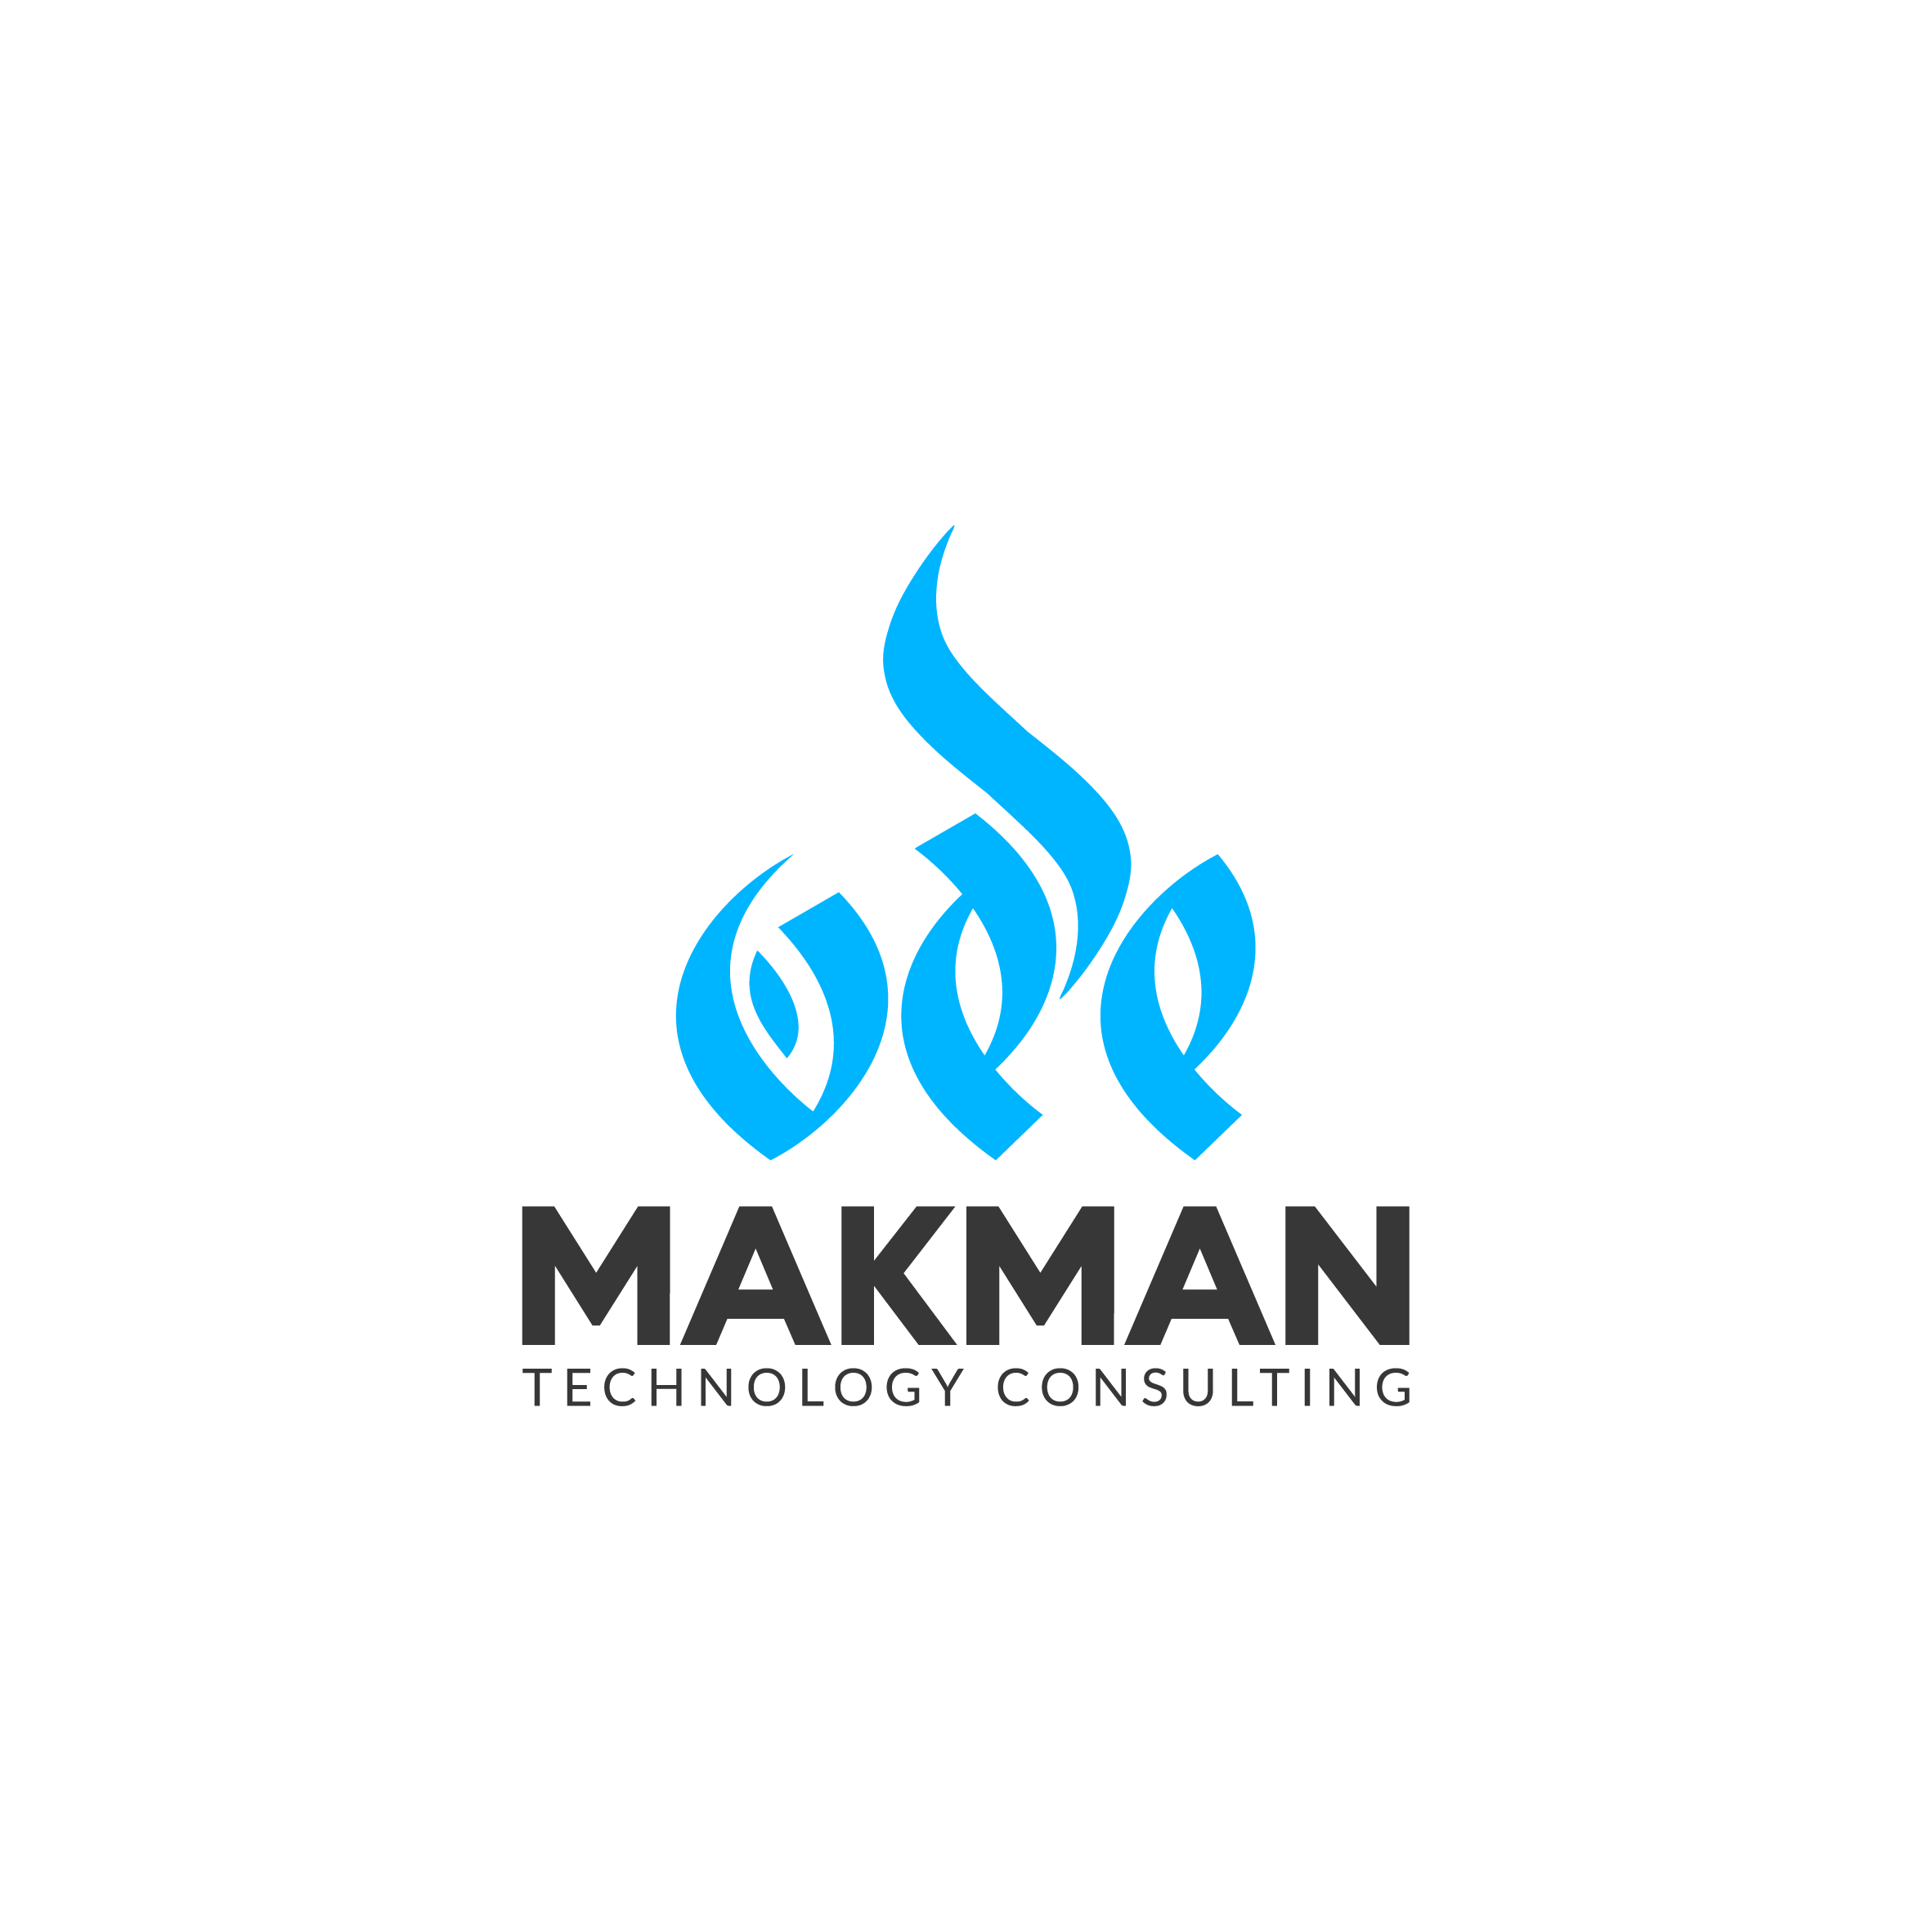 Makman Technology Consulting